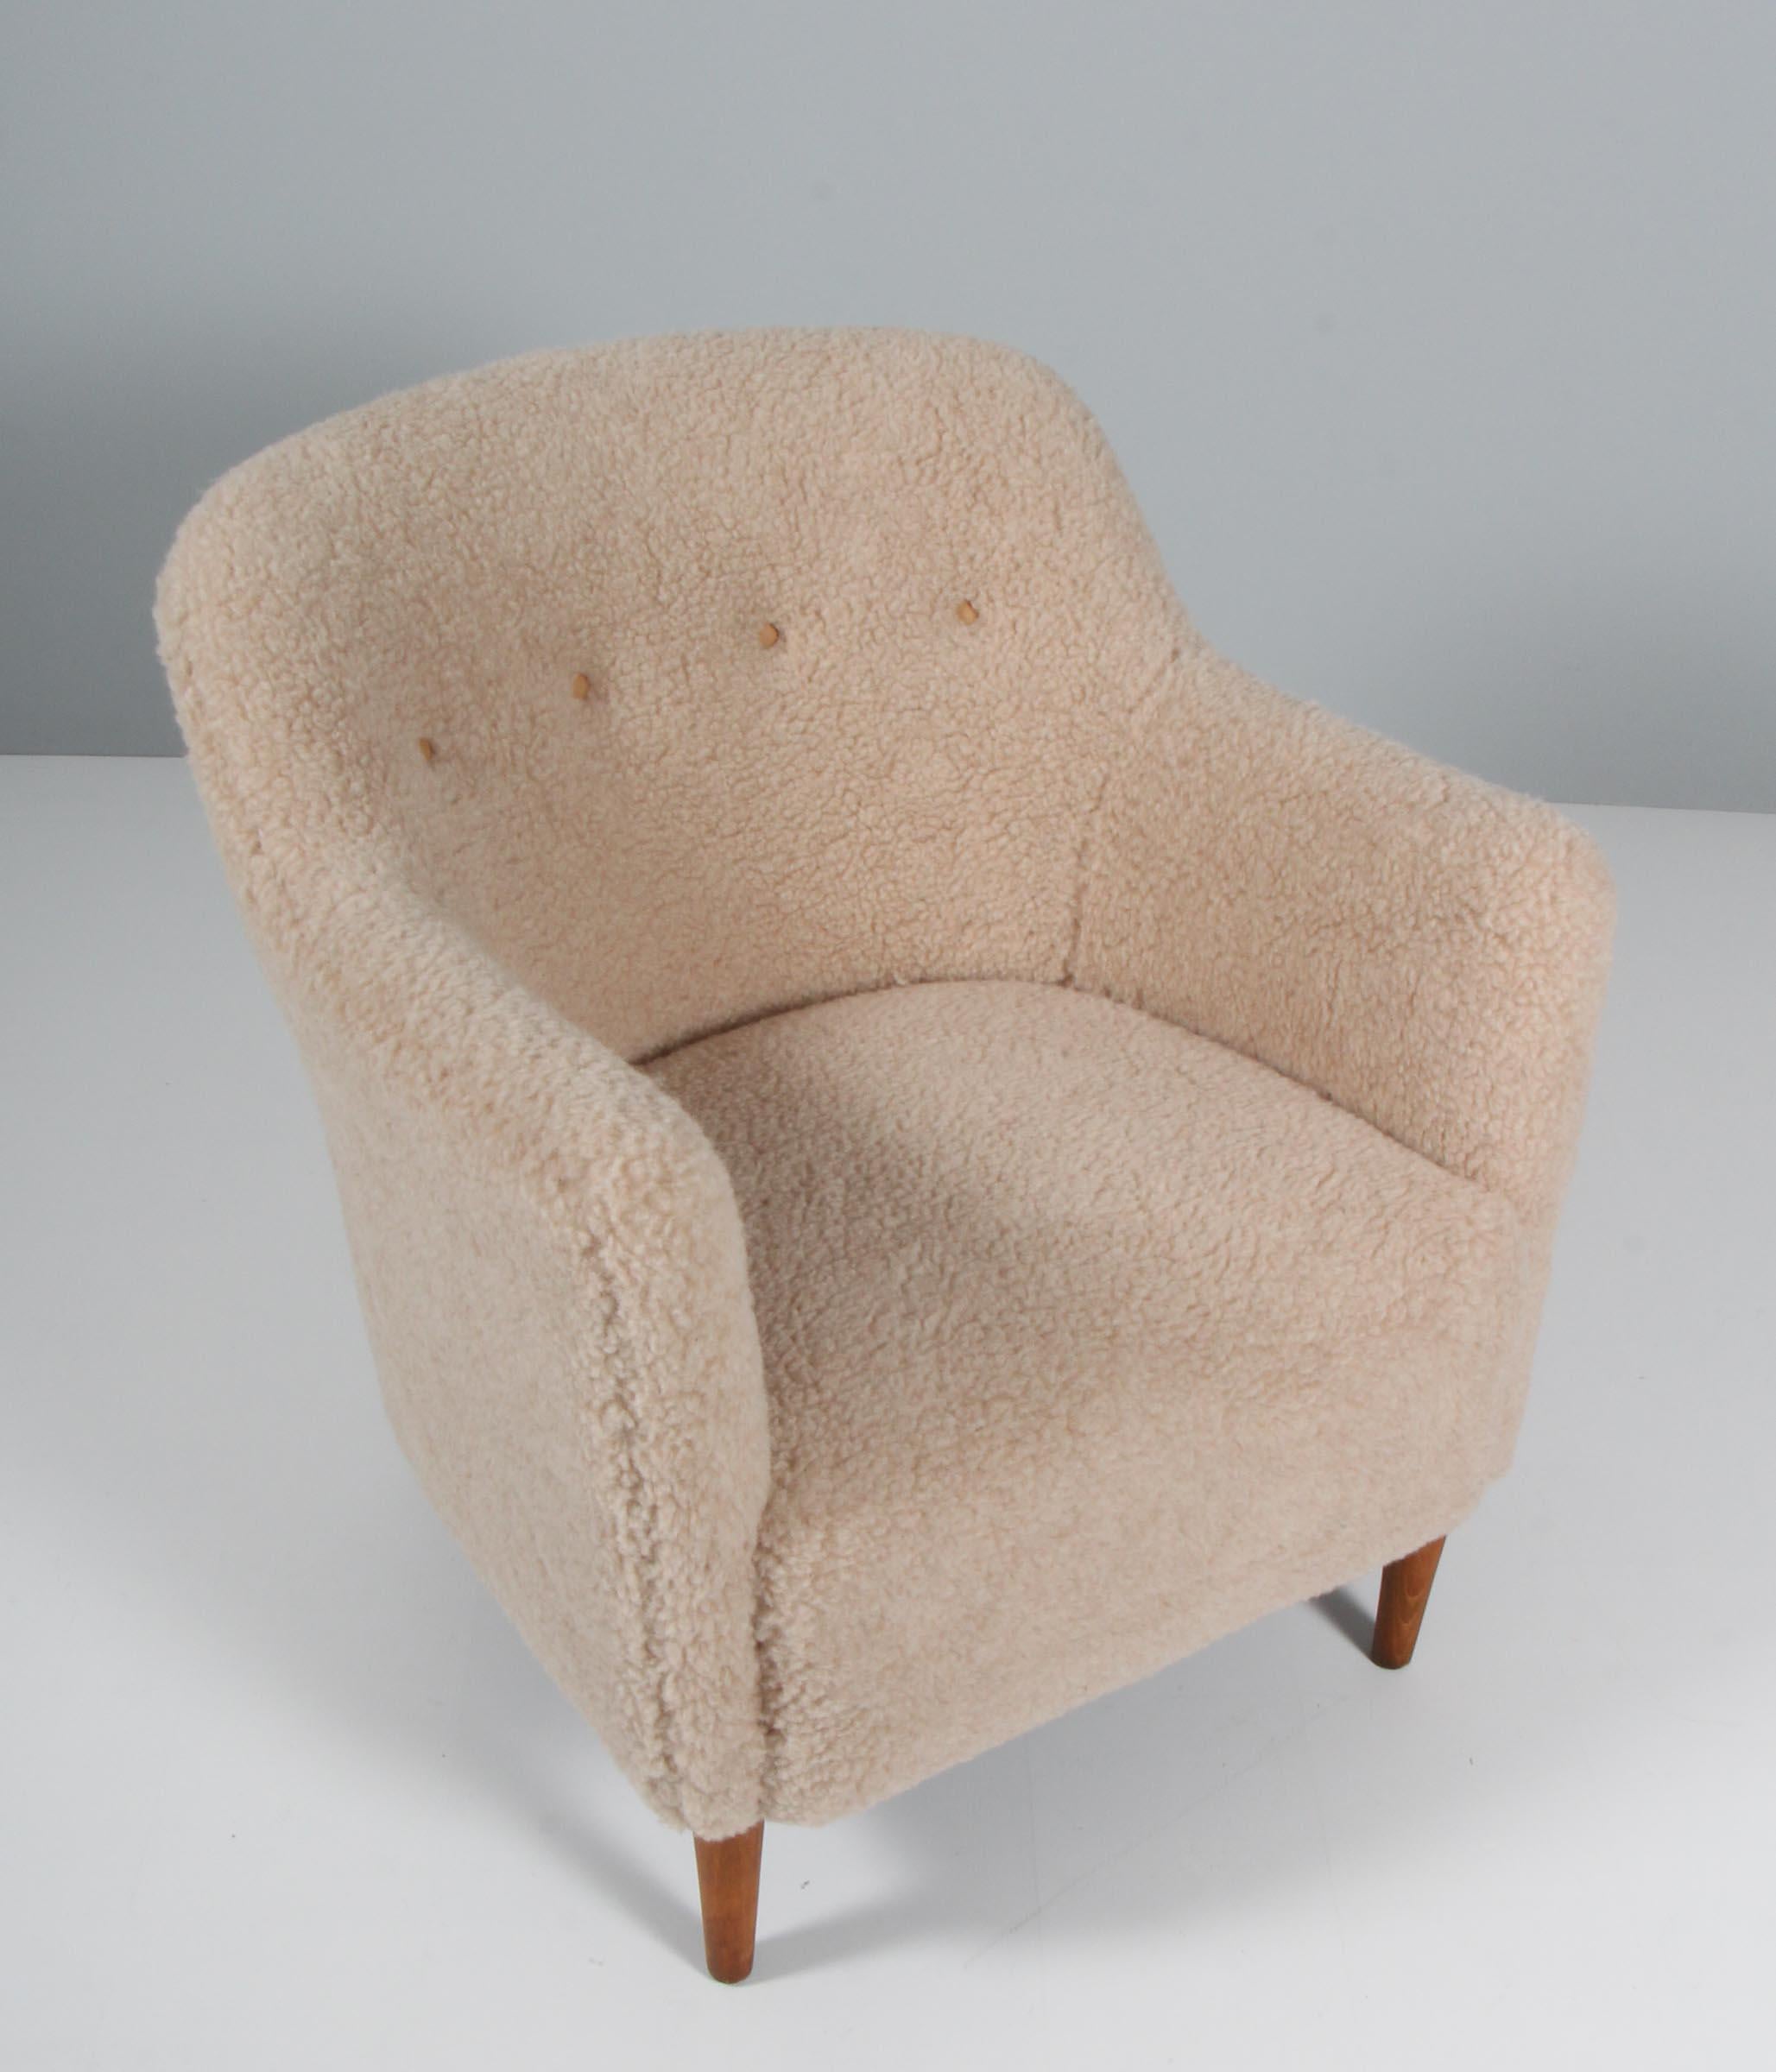 Jacob Kjær lounge chair in lambwool with leather buttons.

Legs of beech.

Made by Jacob Kjær.